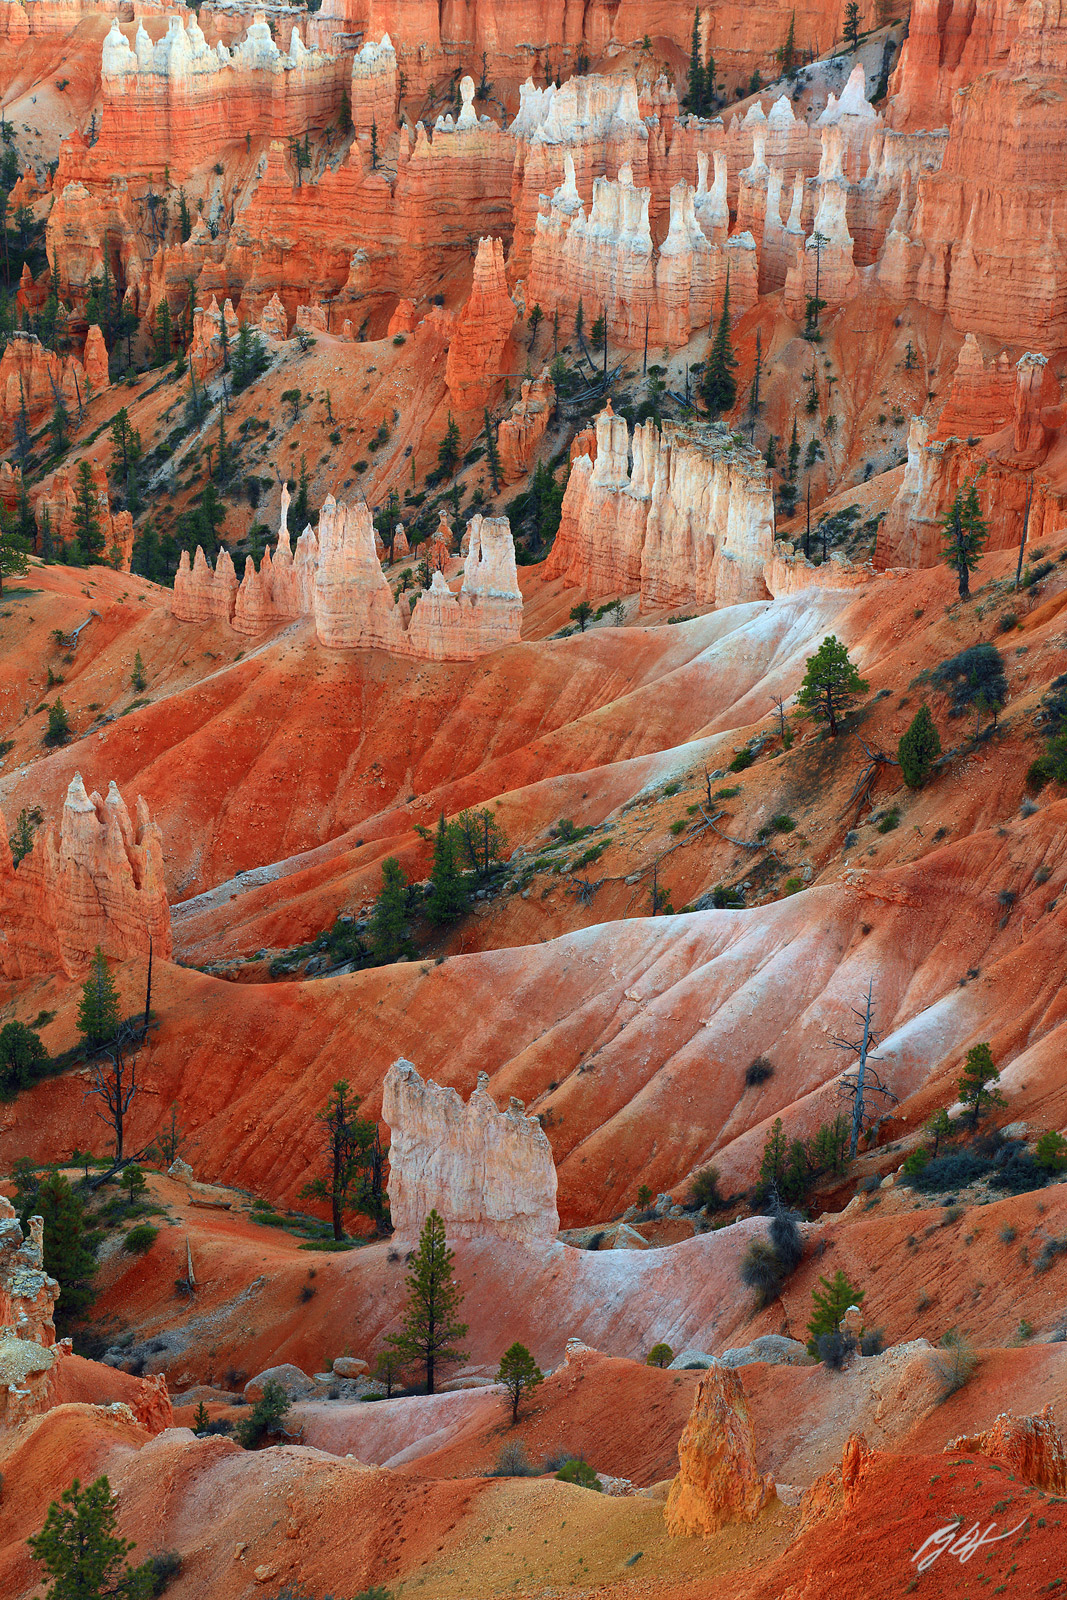 Hoodoo Formations in Bryce Canyon National Park in Utah